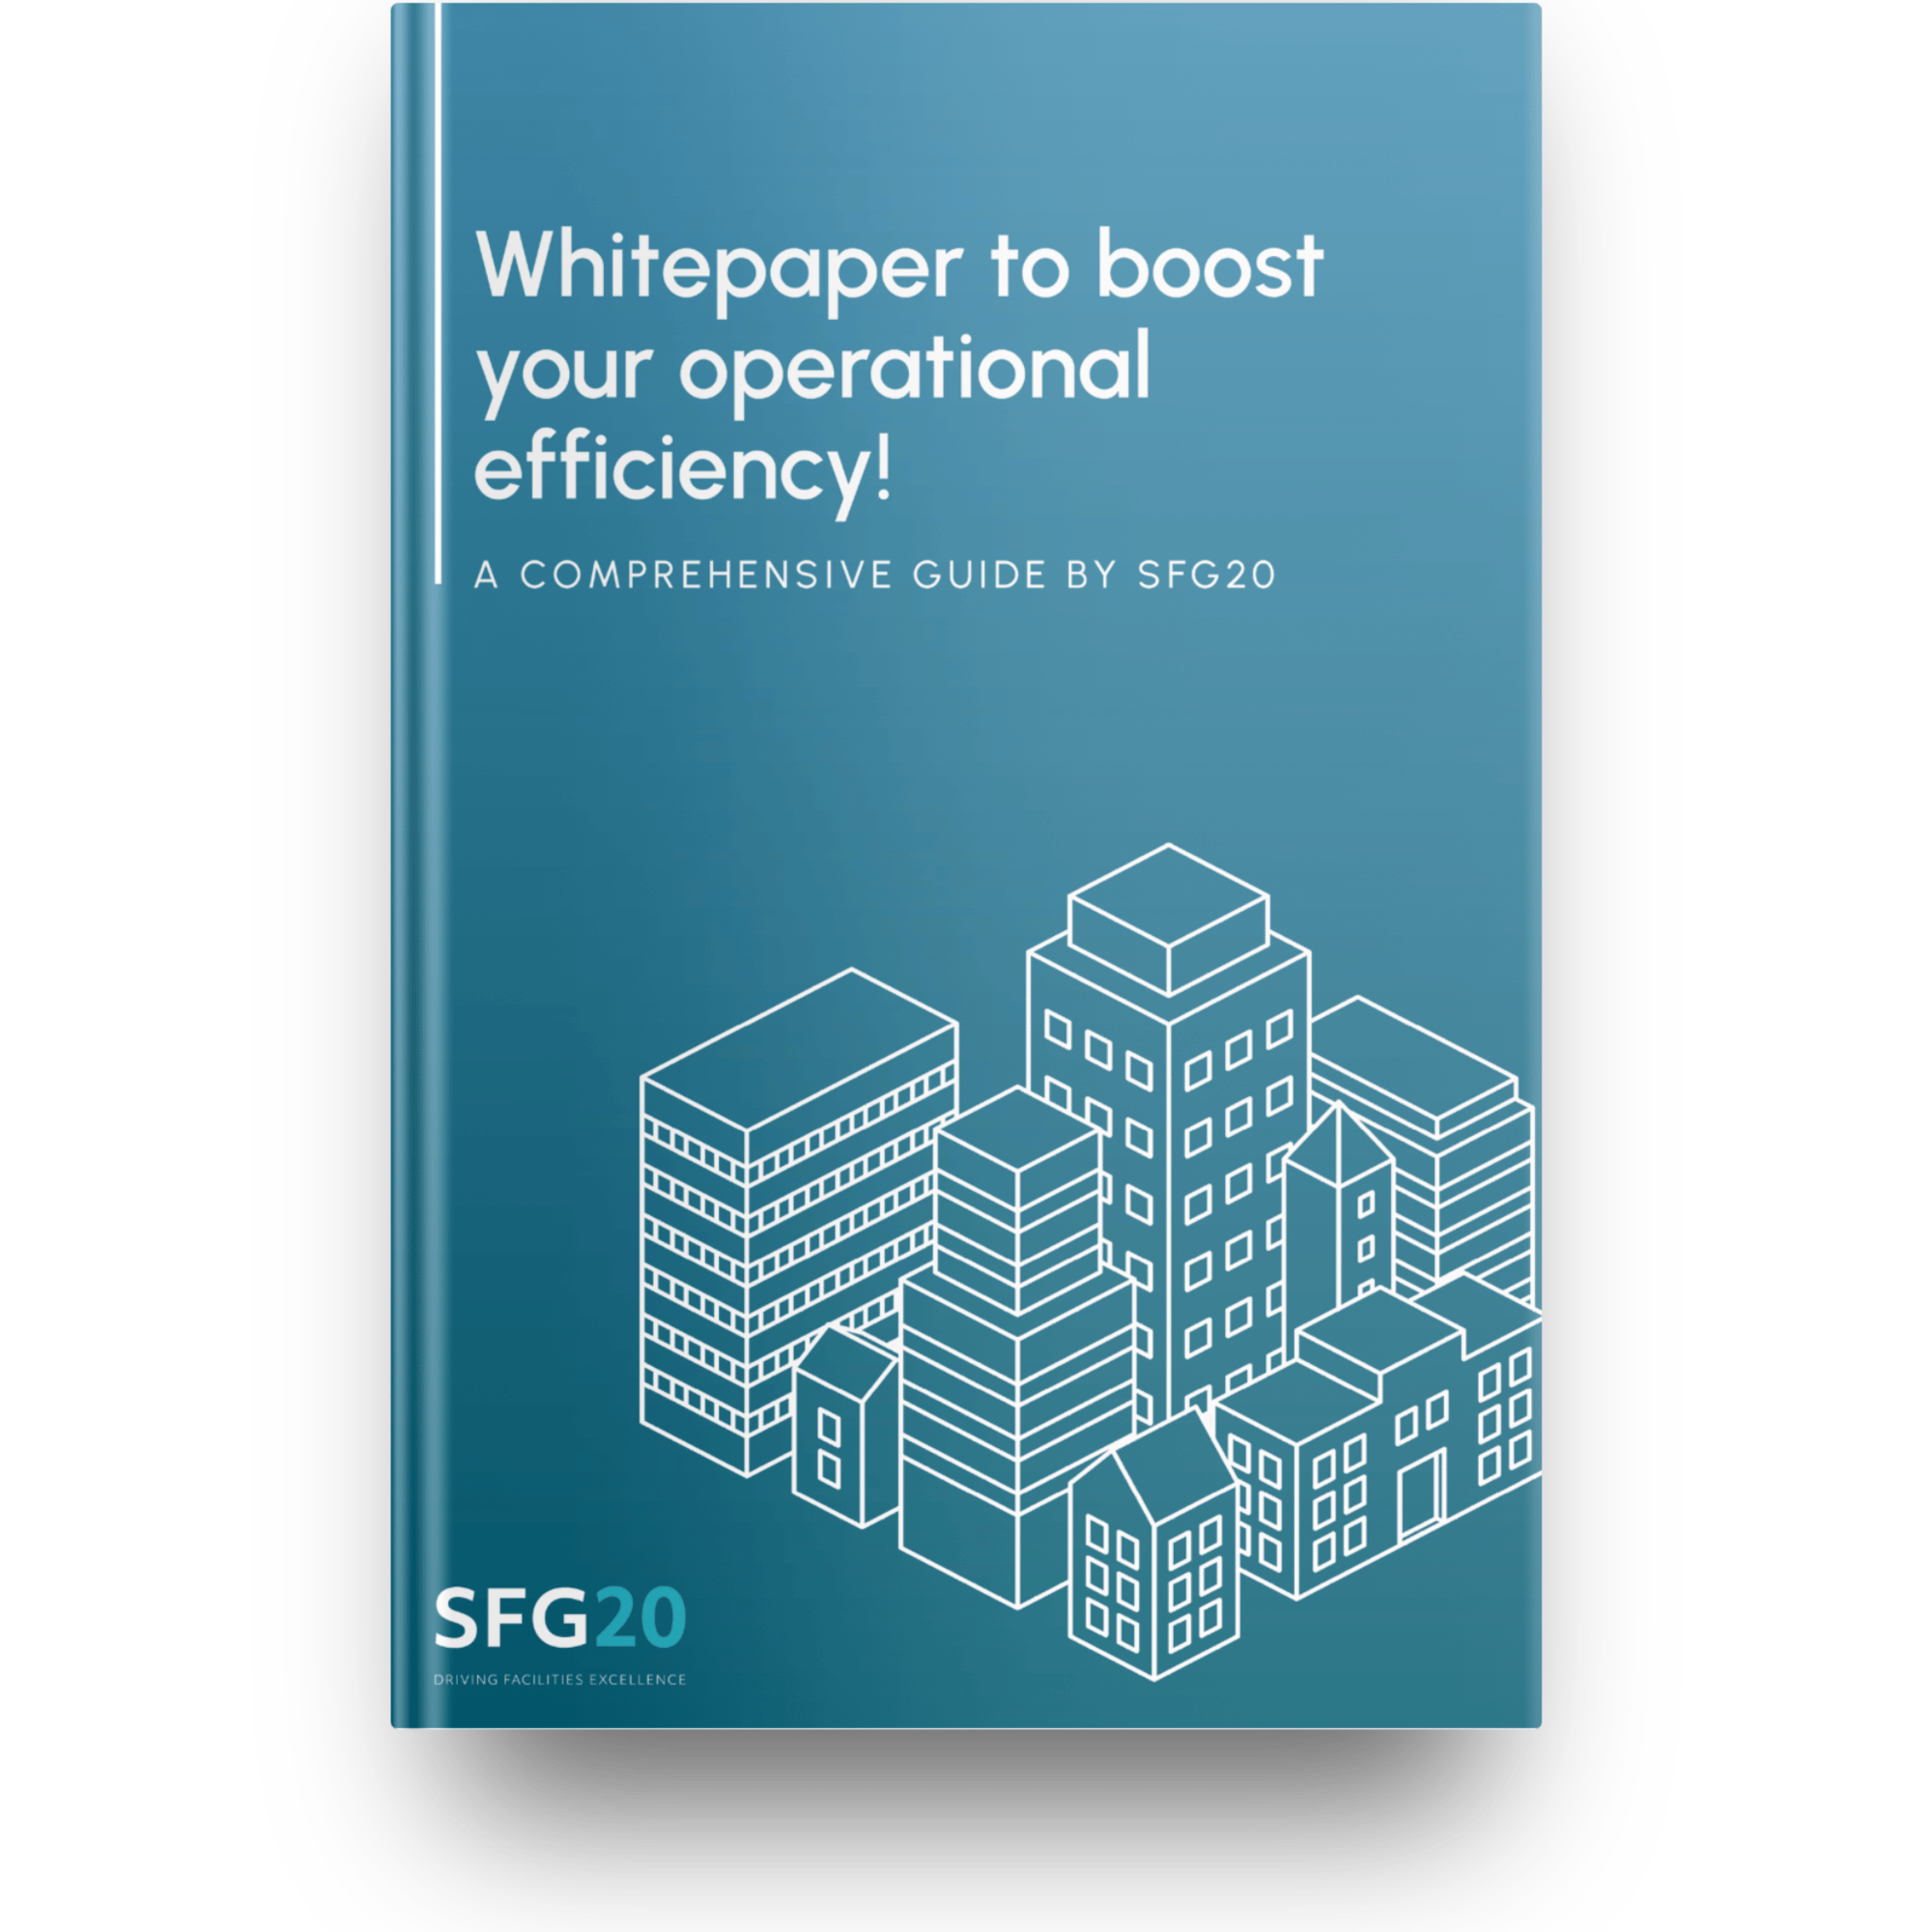 Whitepaper to boost your operational efficiency